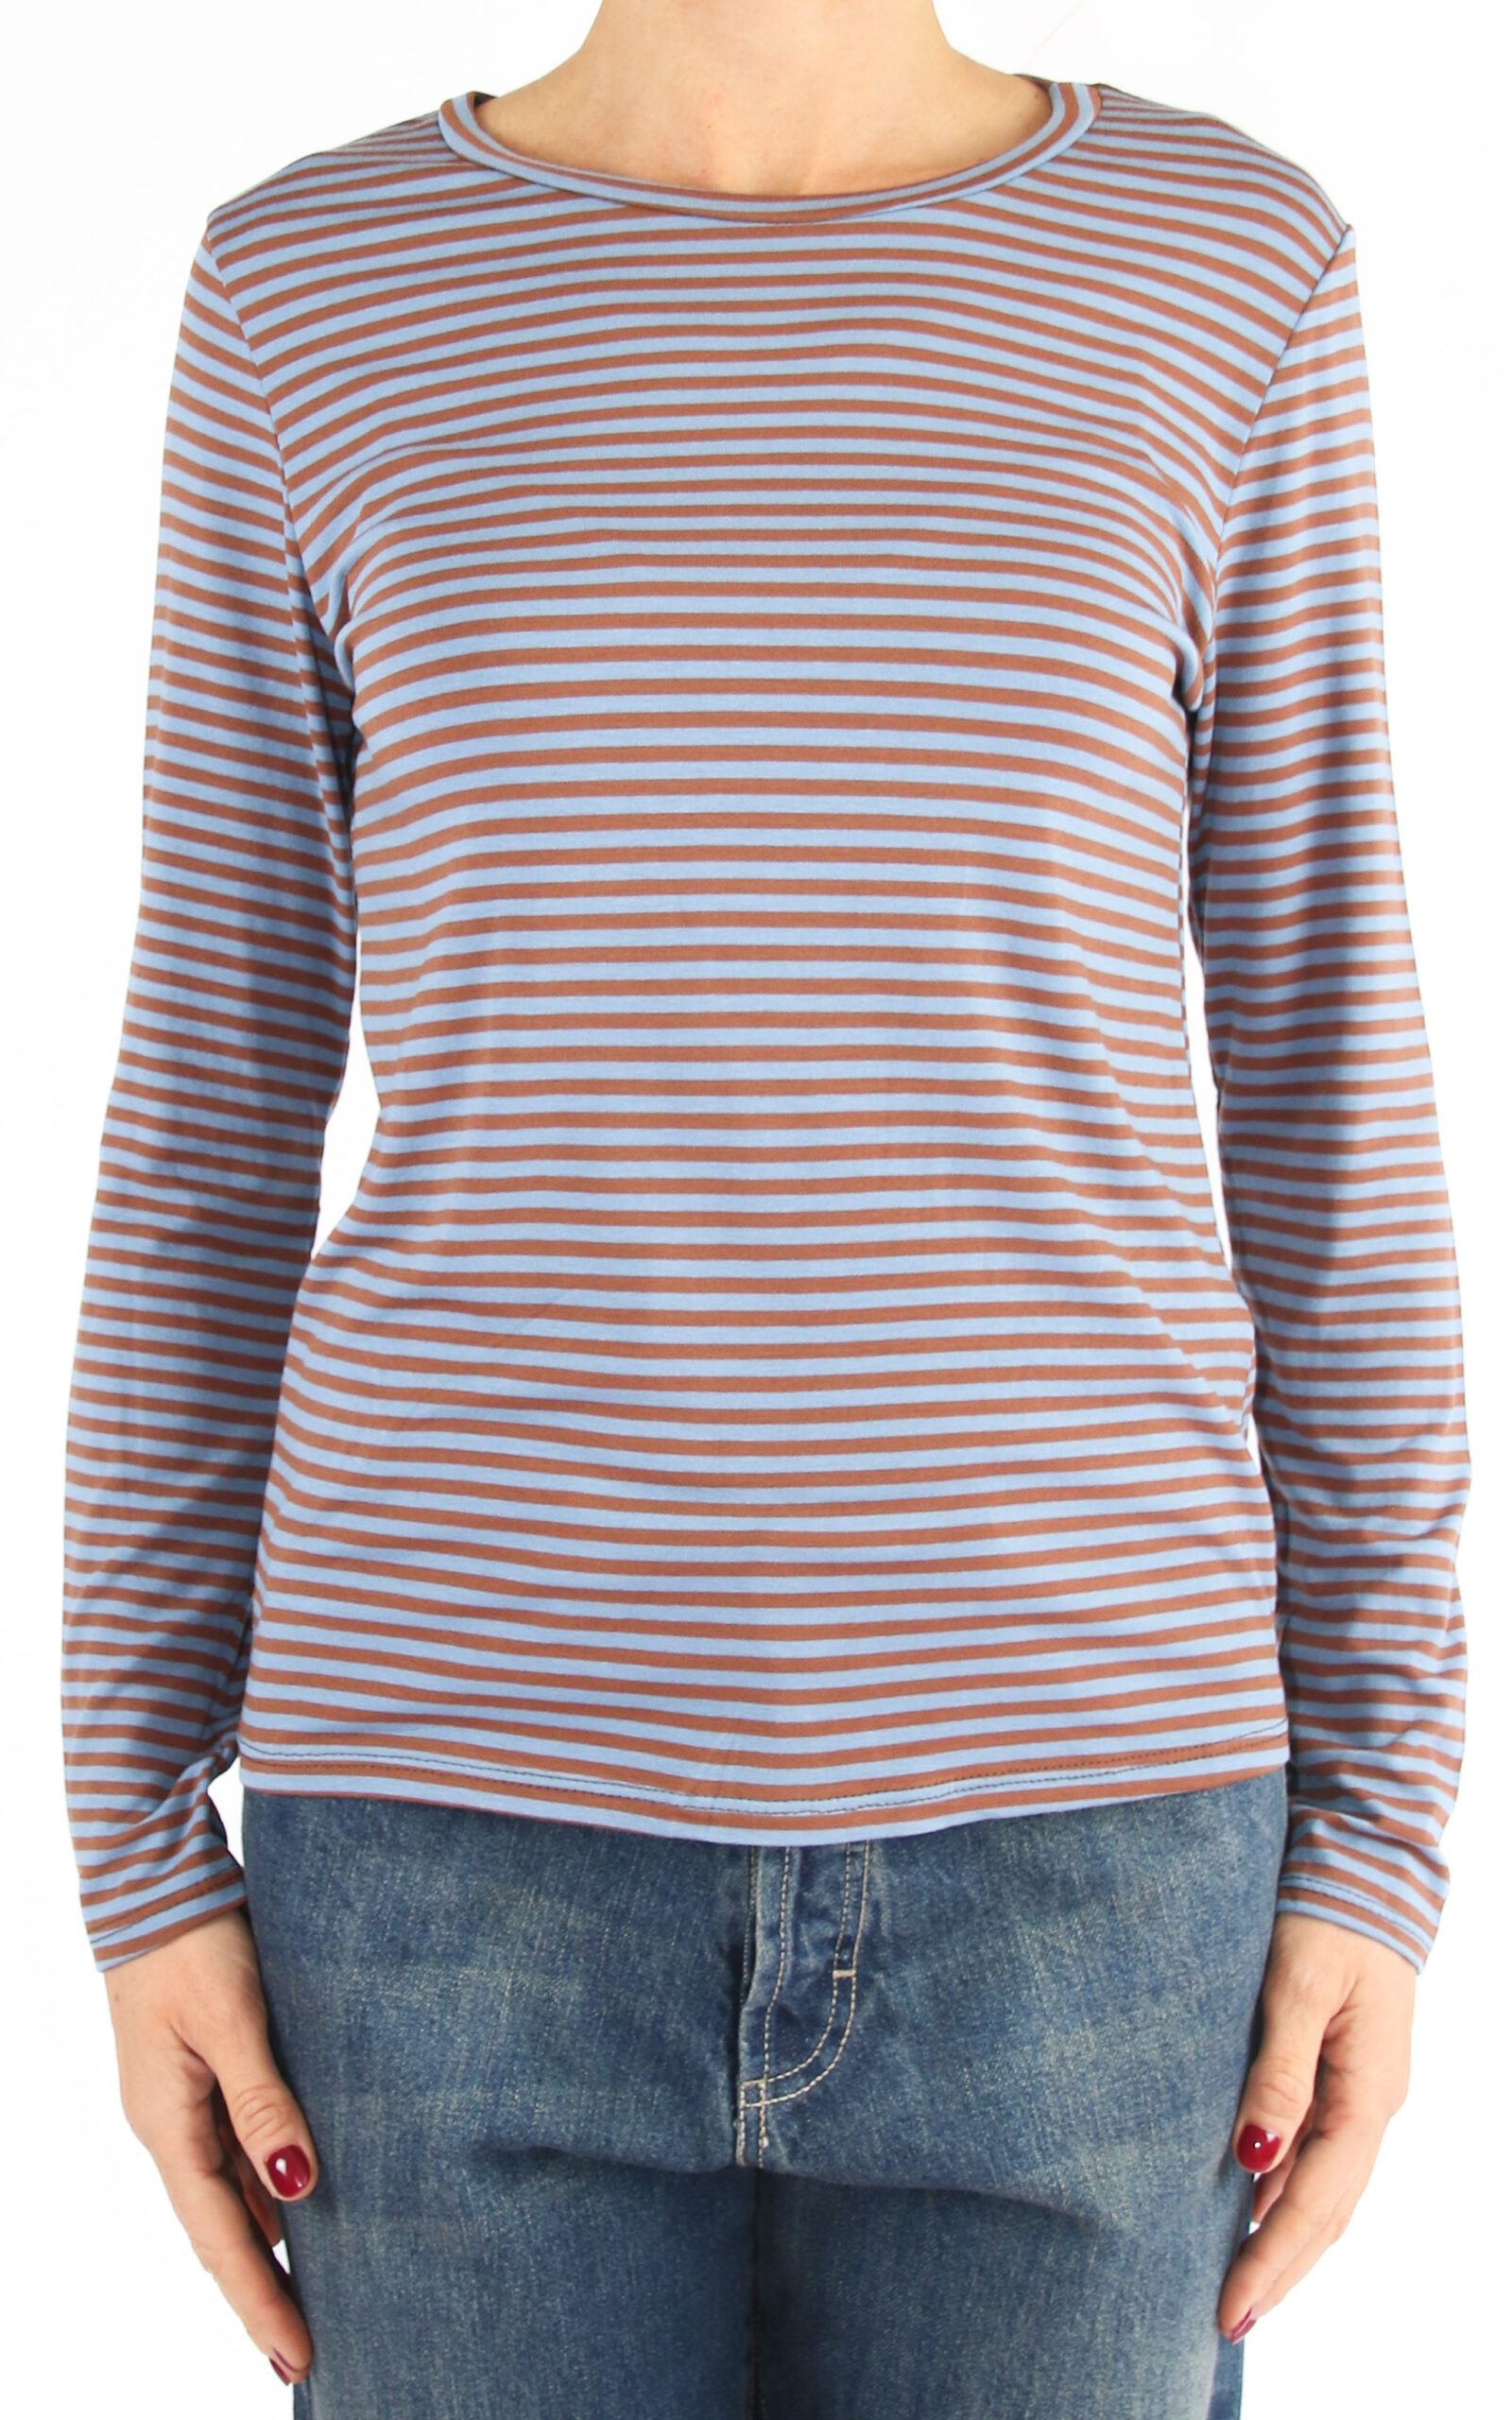 Off-On - t-shirt slim a righe - marrone/polvere